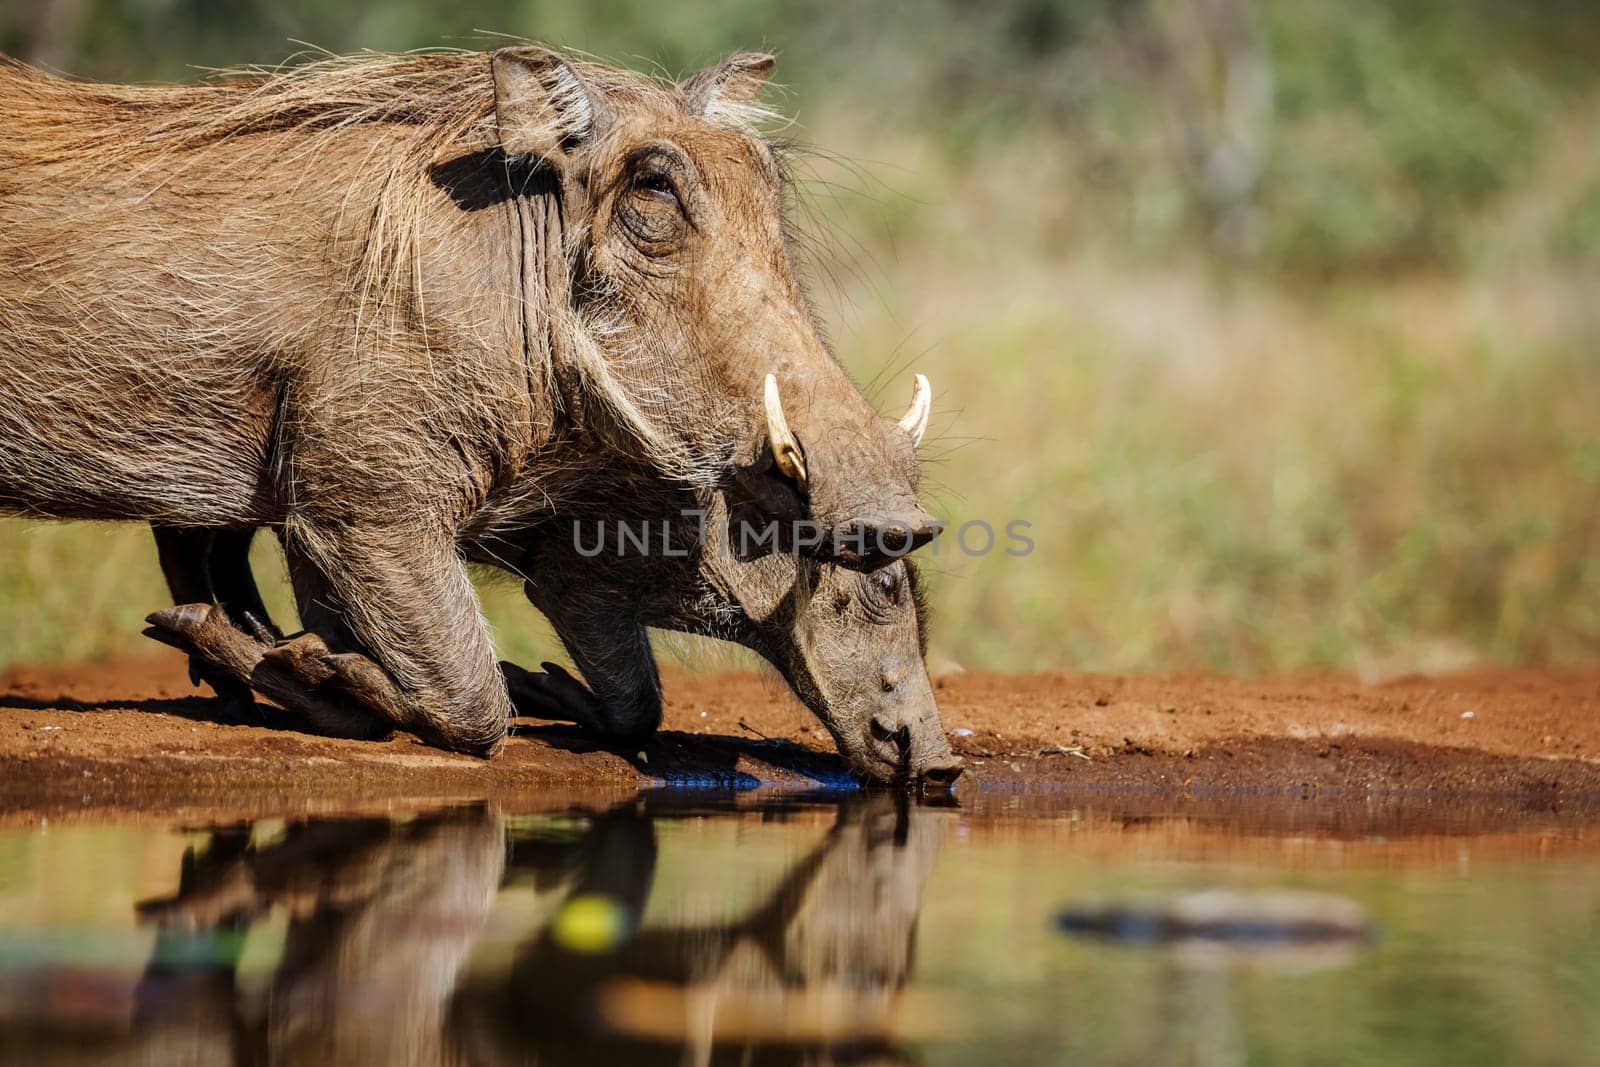 Common warthog in Kruger national park, South Africa by PACOCOMO